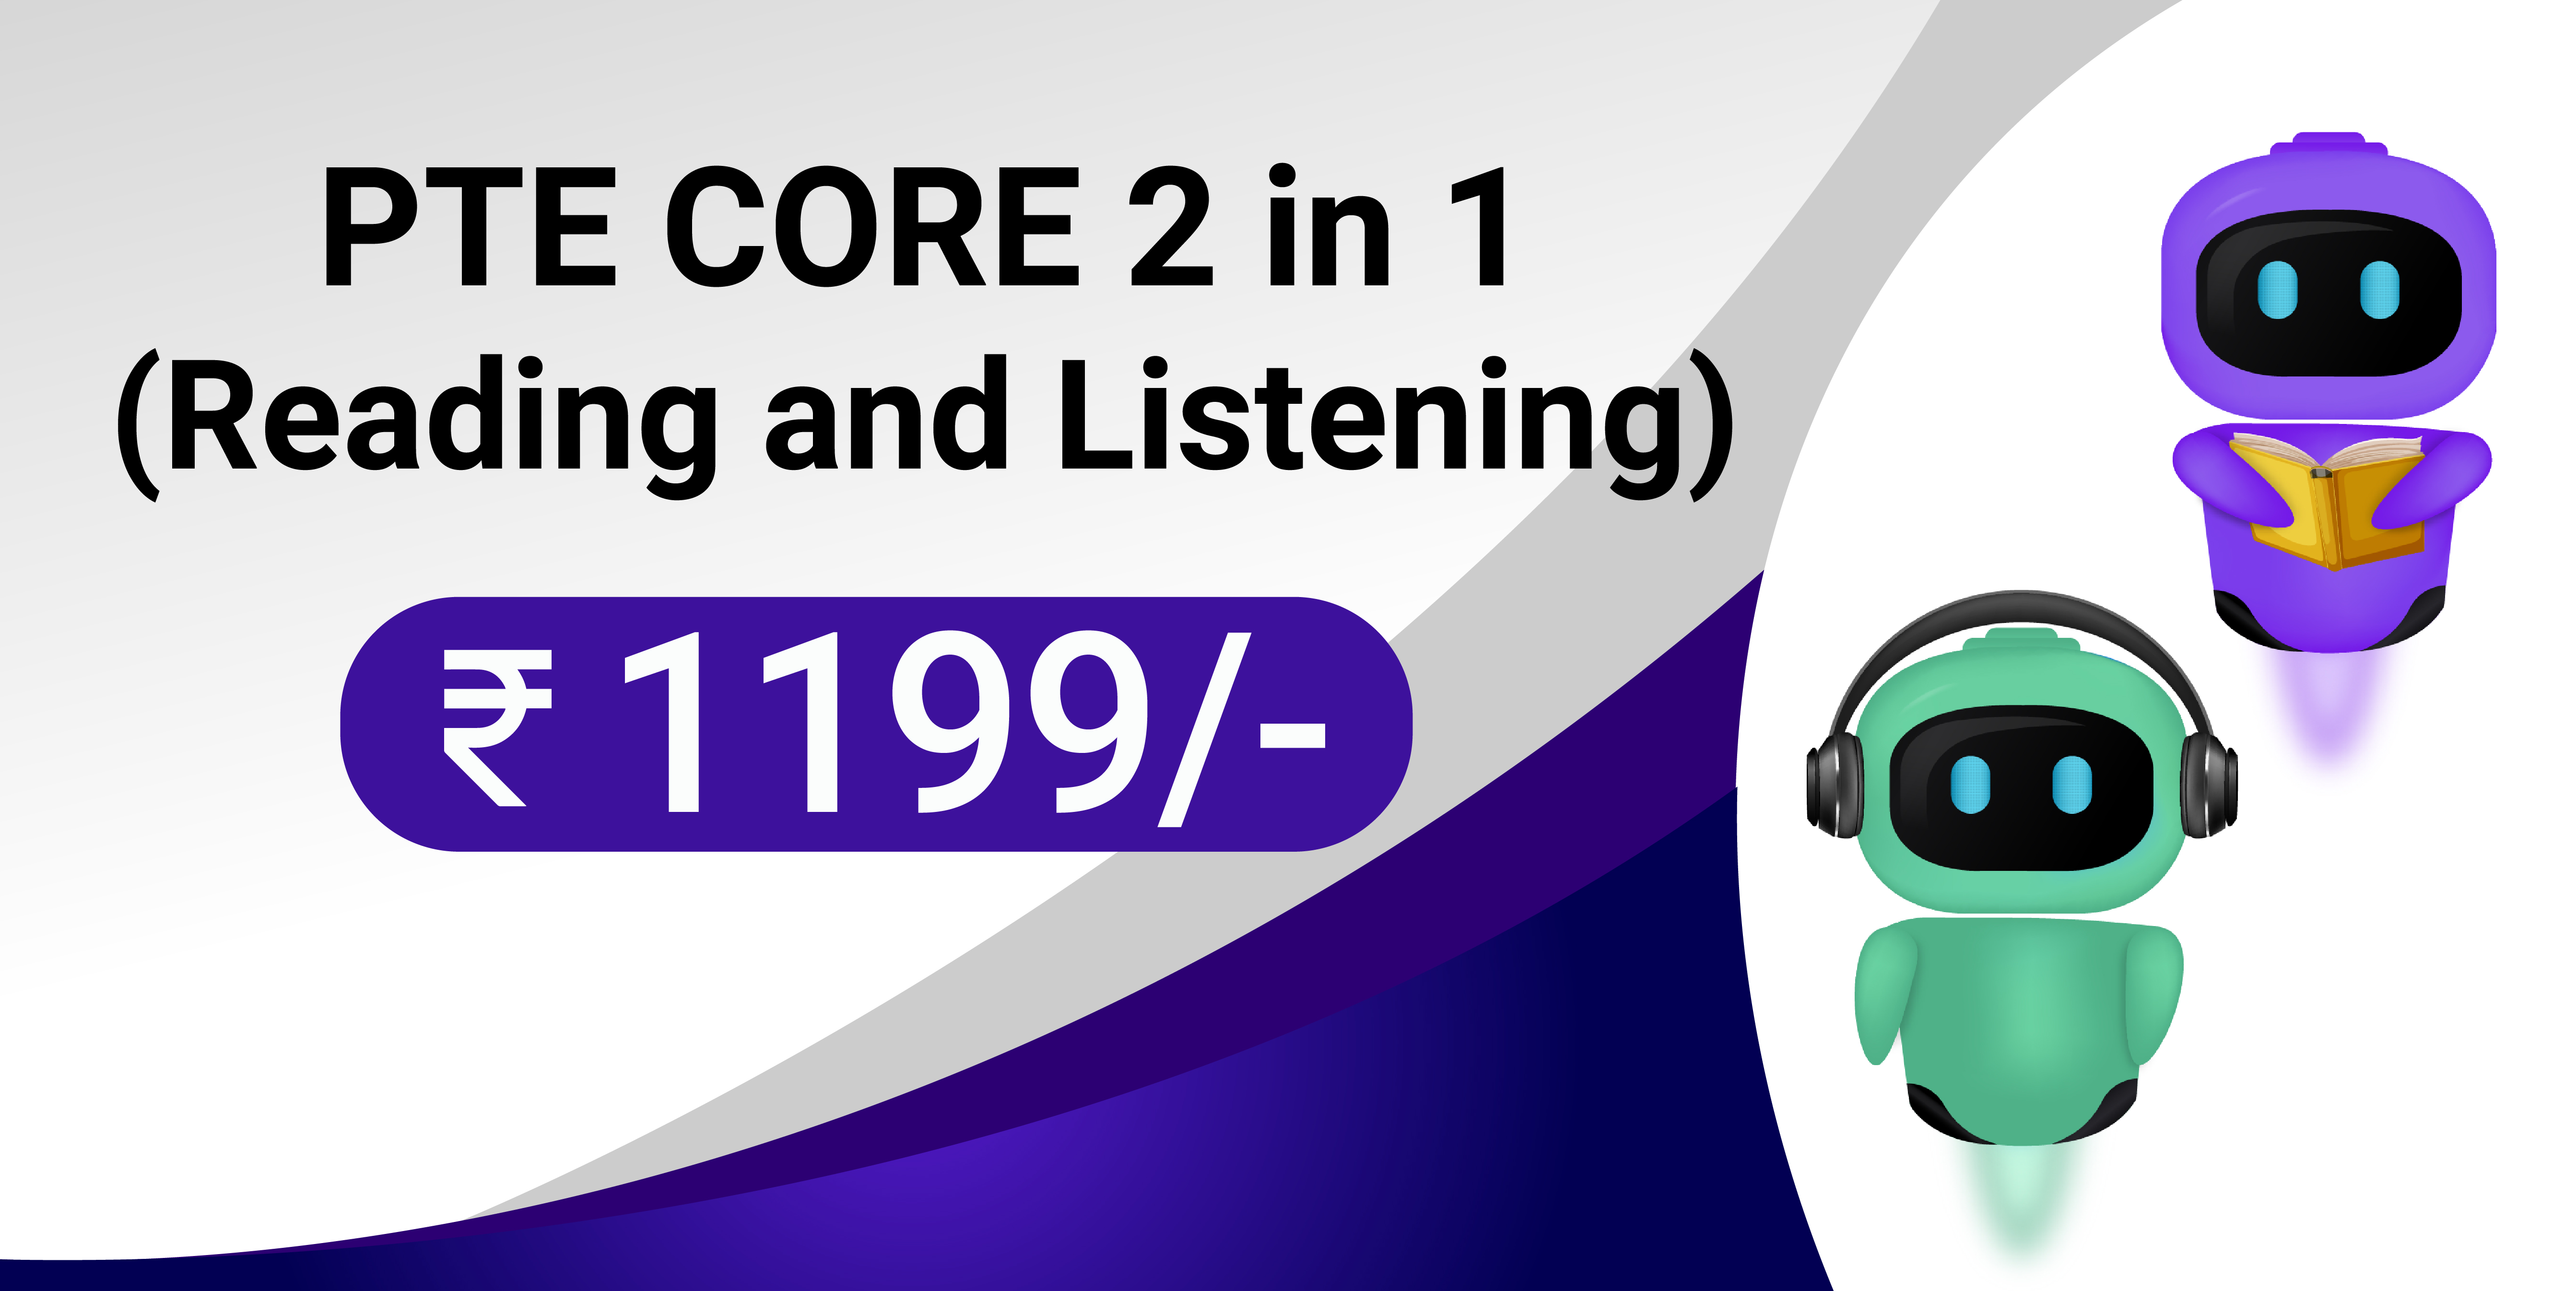 PTE CORE  2 in 1 (Reading and Listening)